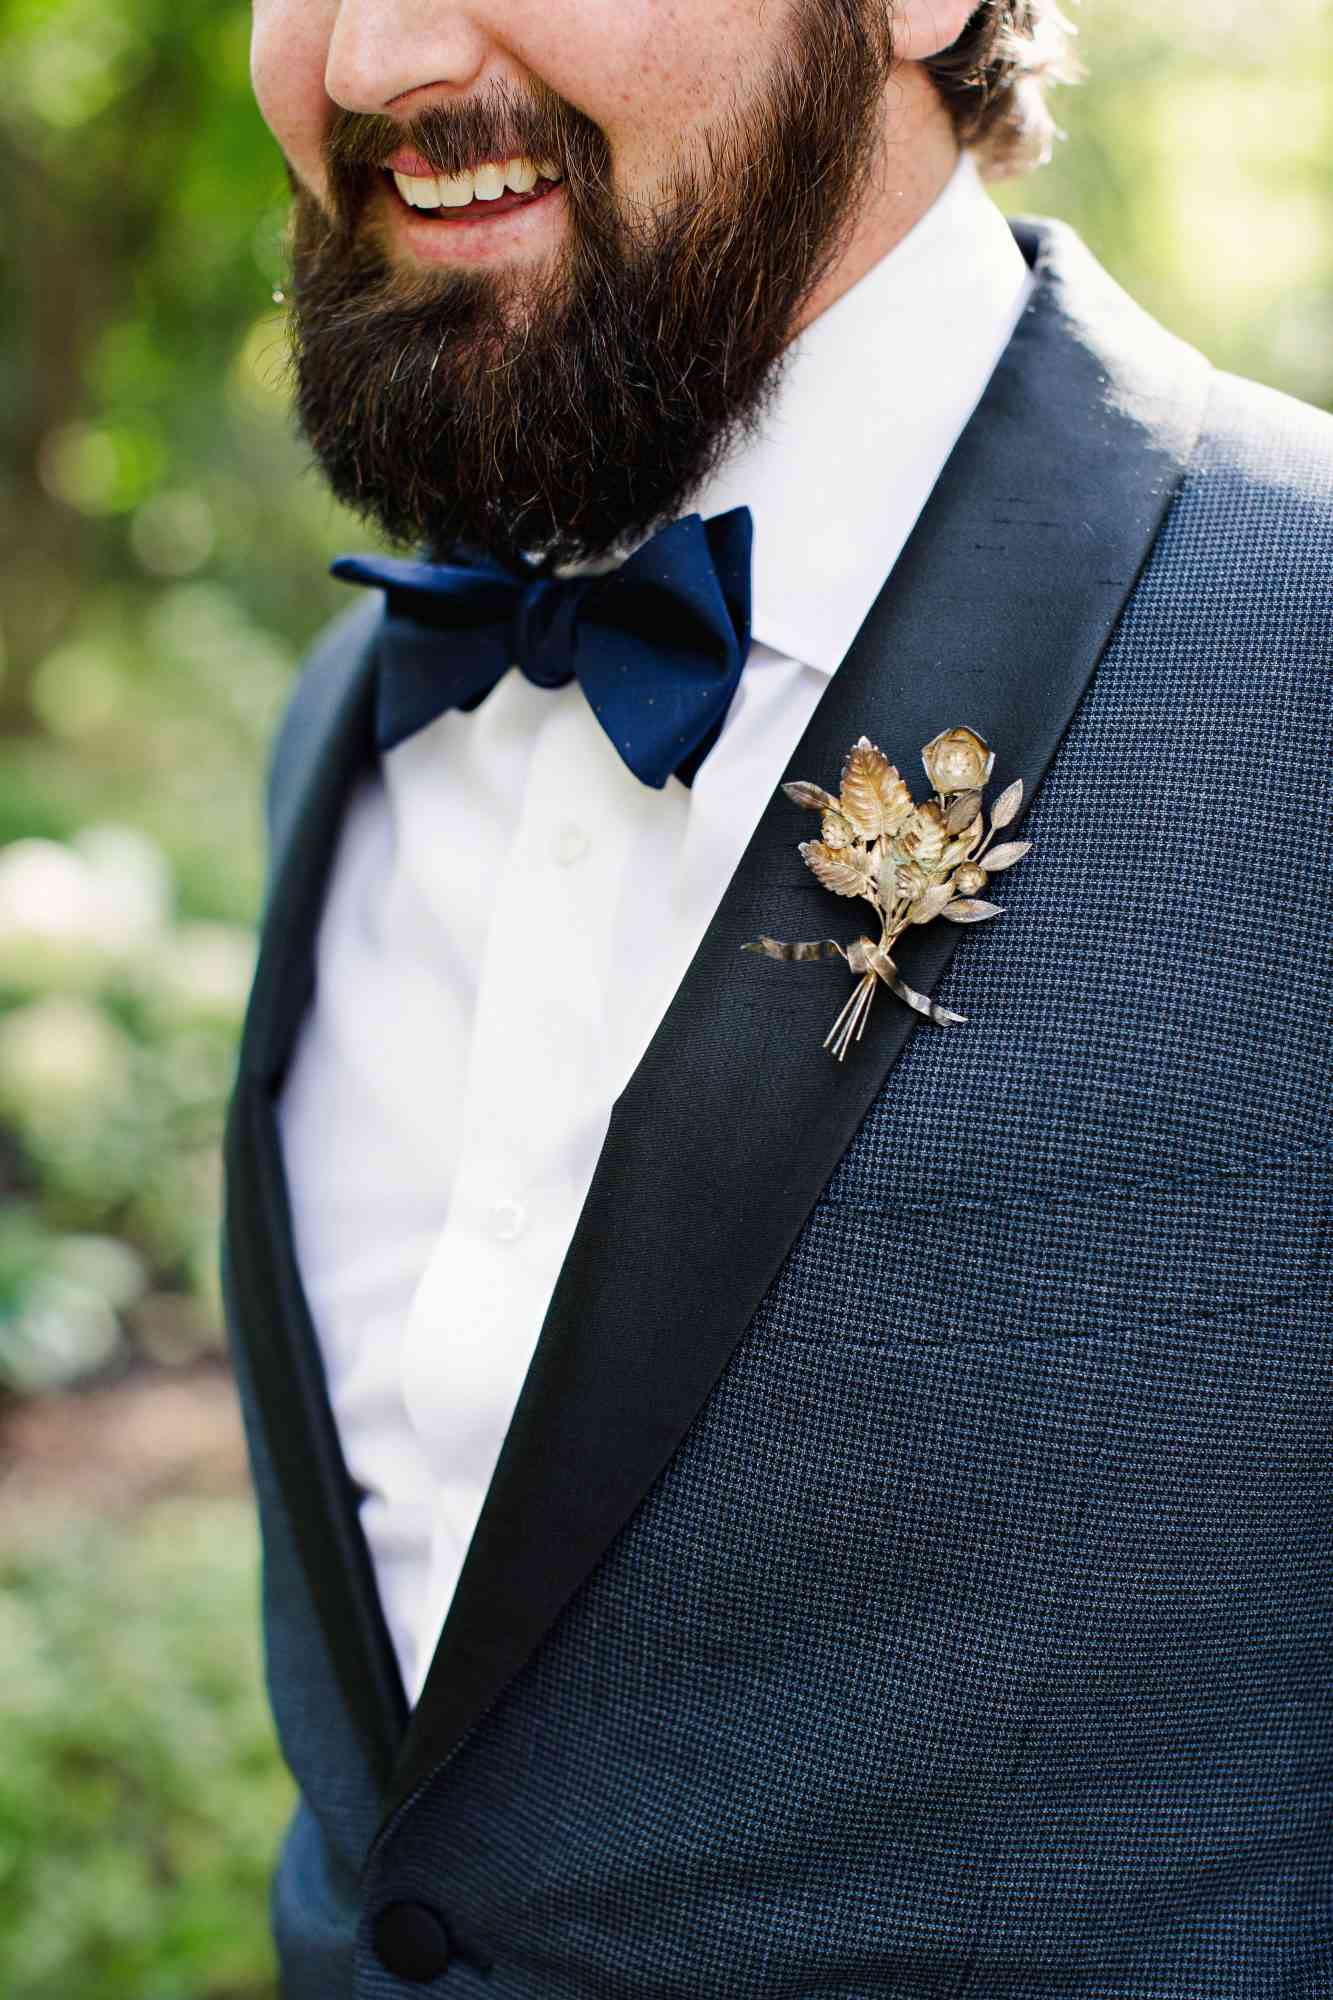 The Groom's Boutonniere